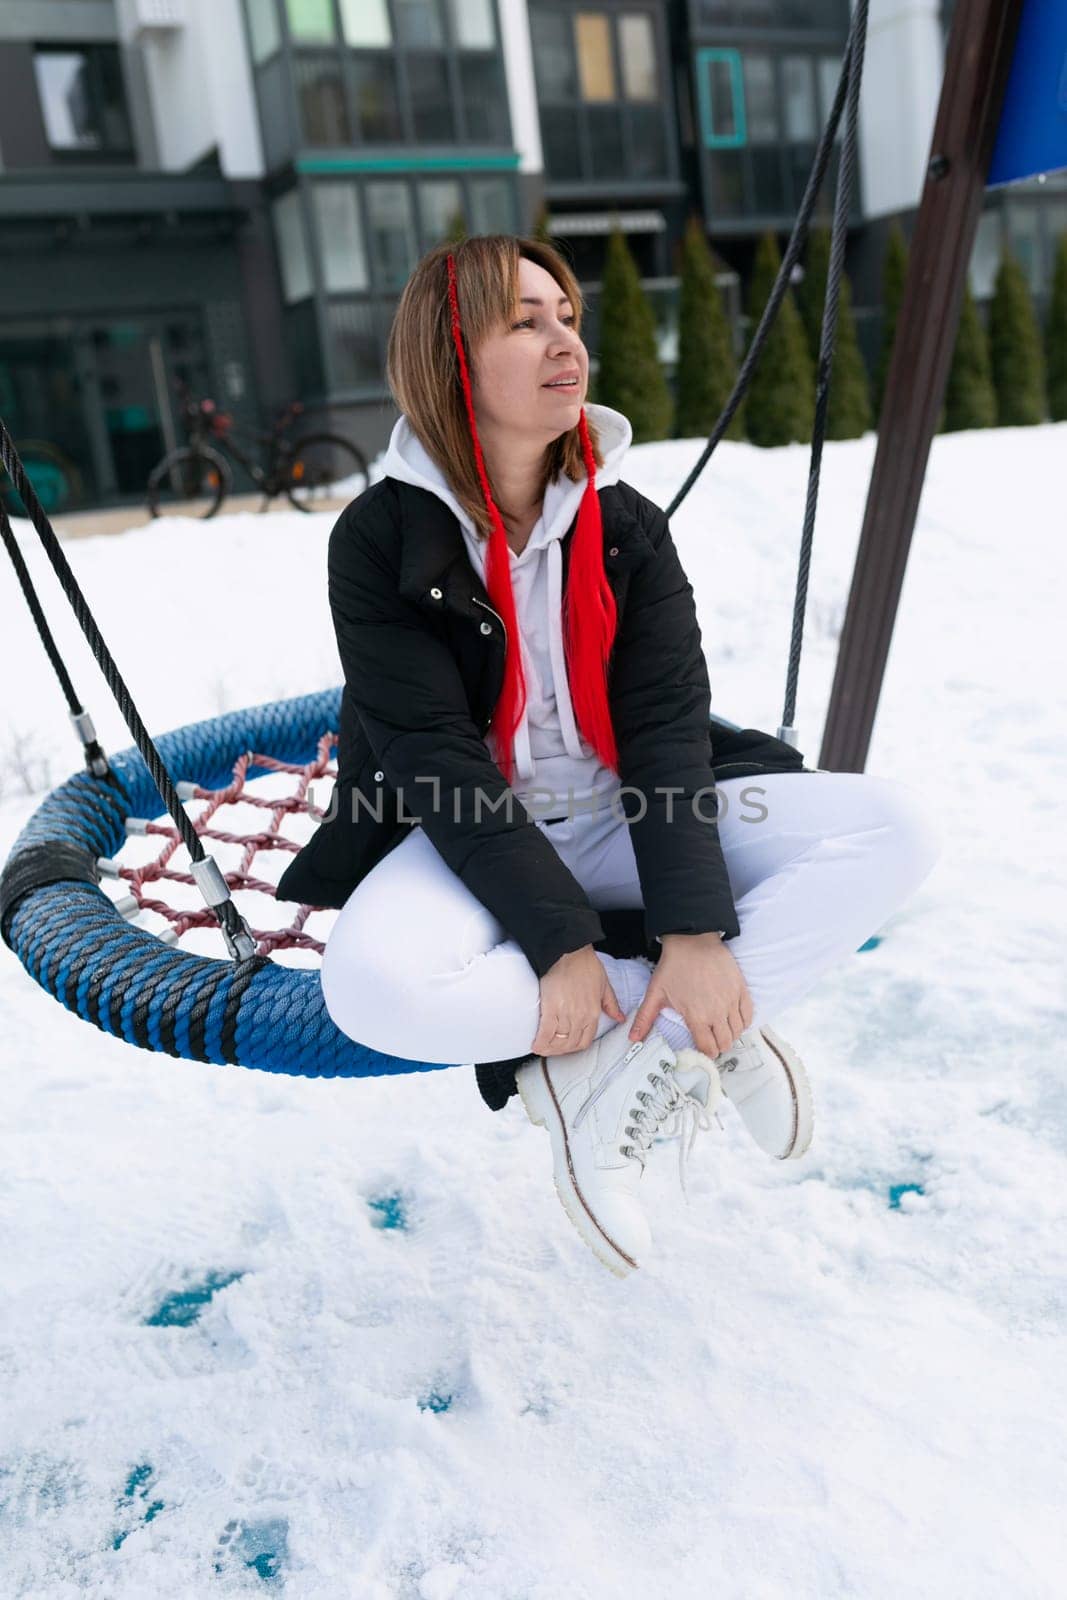 Carefree young woman riding on a swing in winter by TRMK